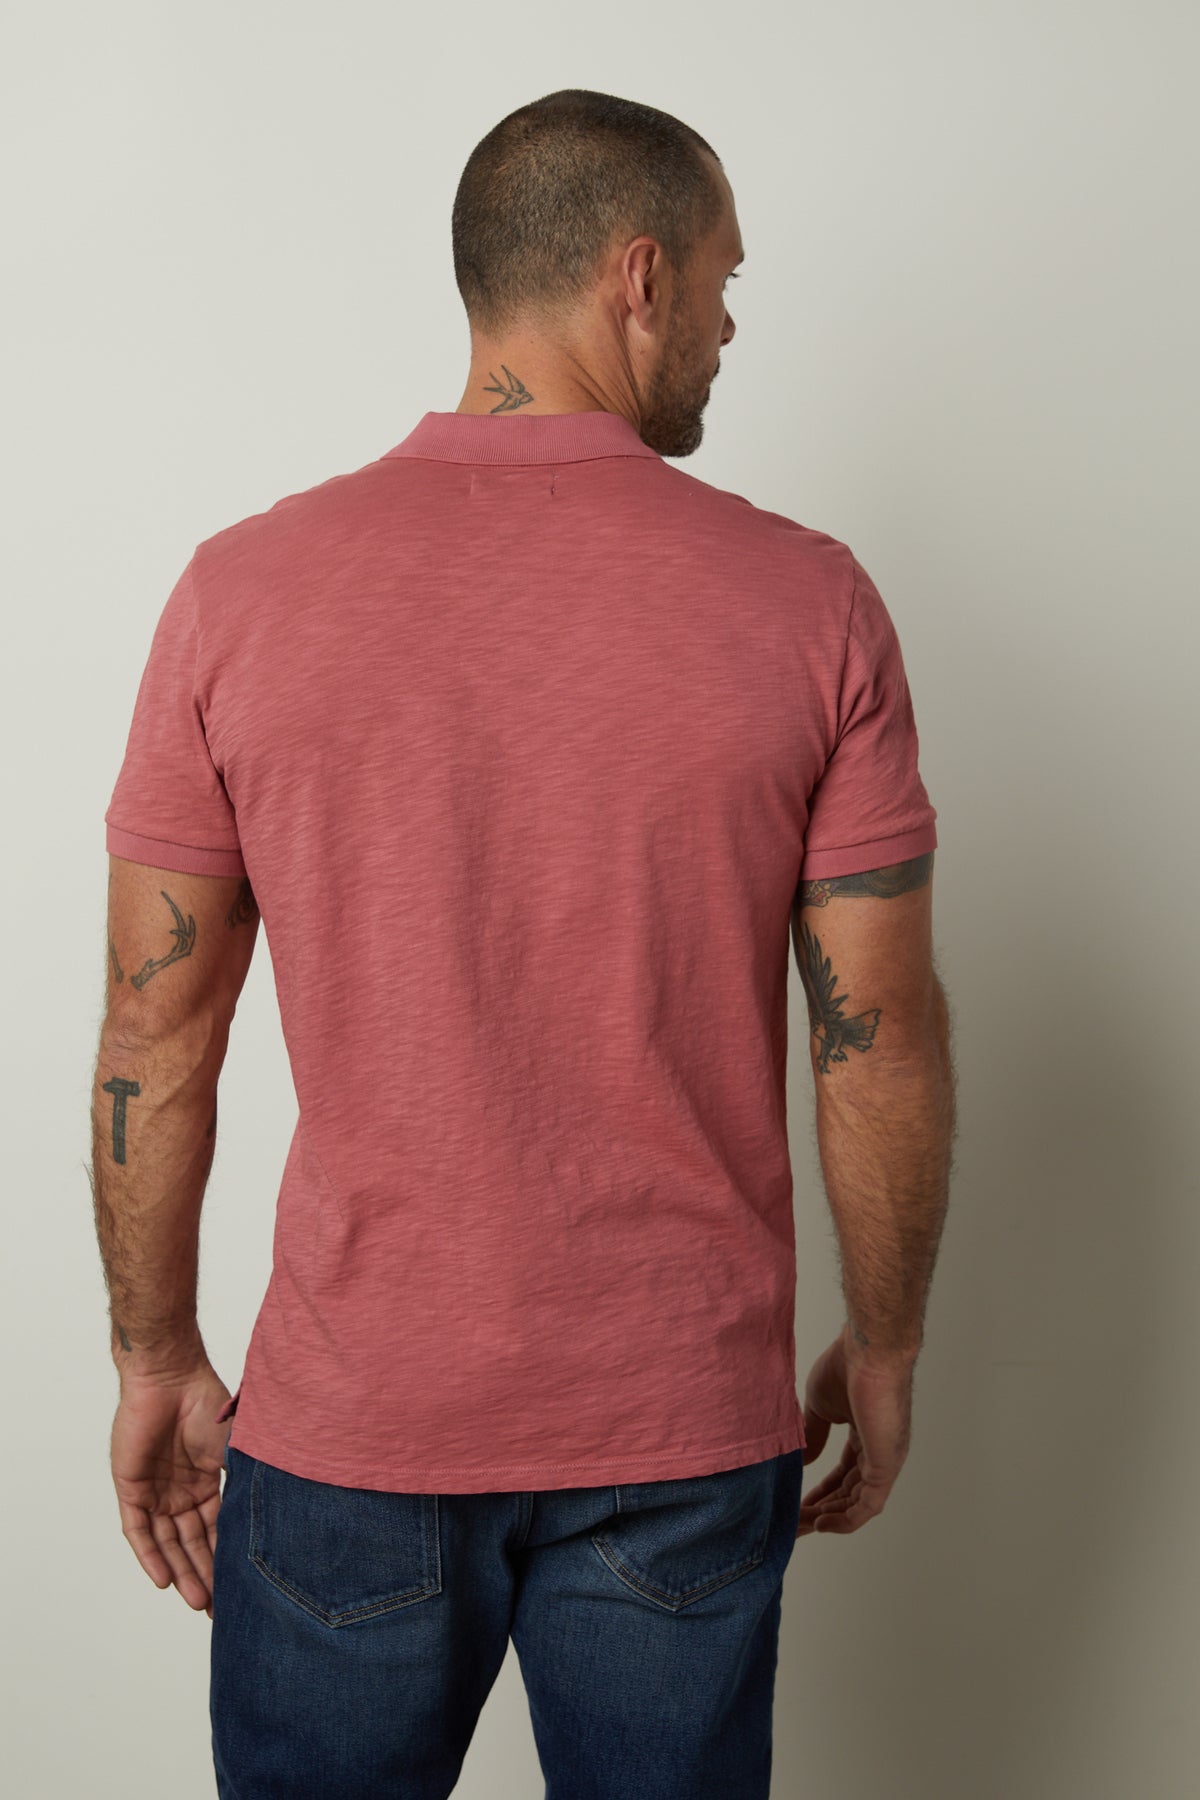   The back view of a man wearing a NIKO POLO shirt by Velvet by Graham & Spencer. 